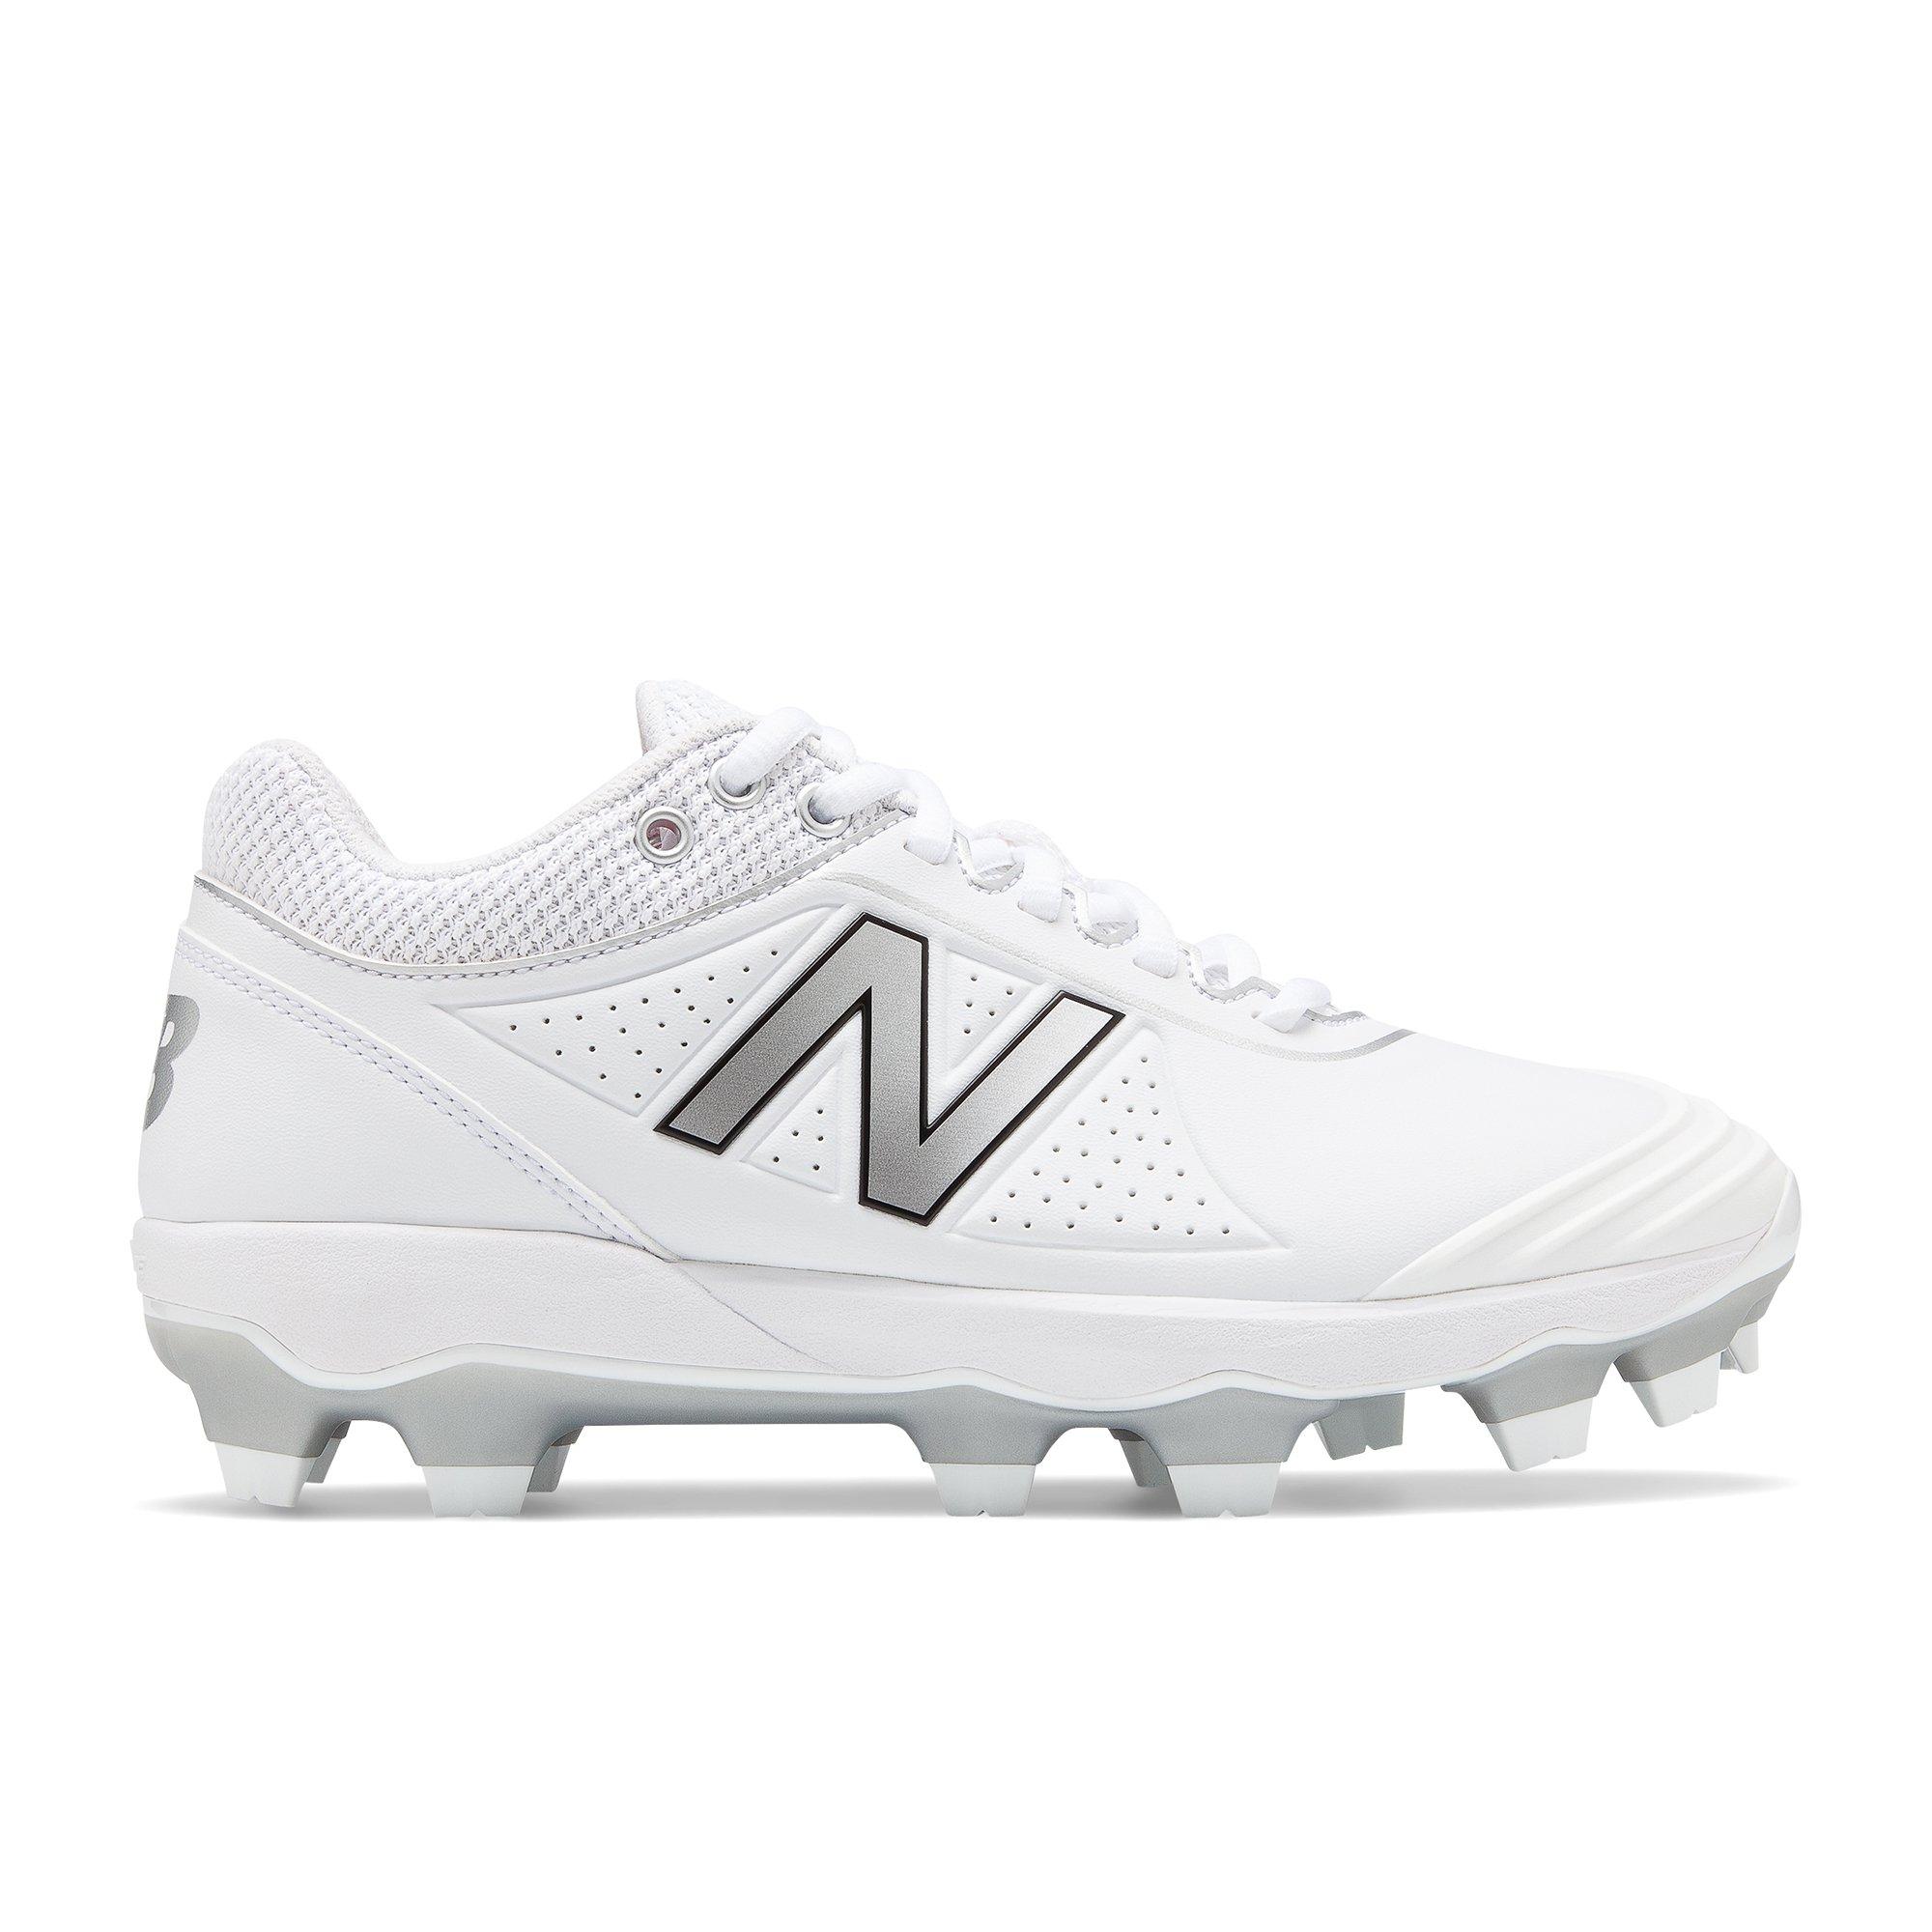 white and gold softball cleats